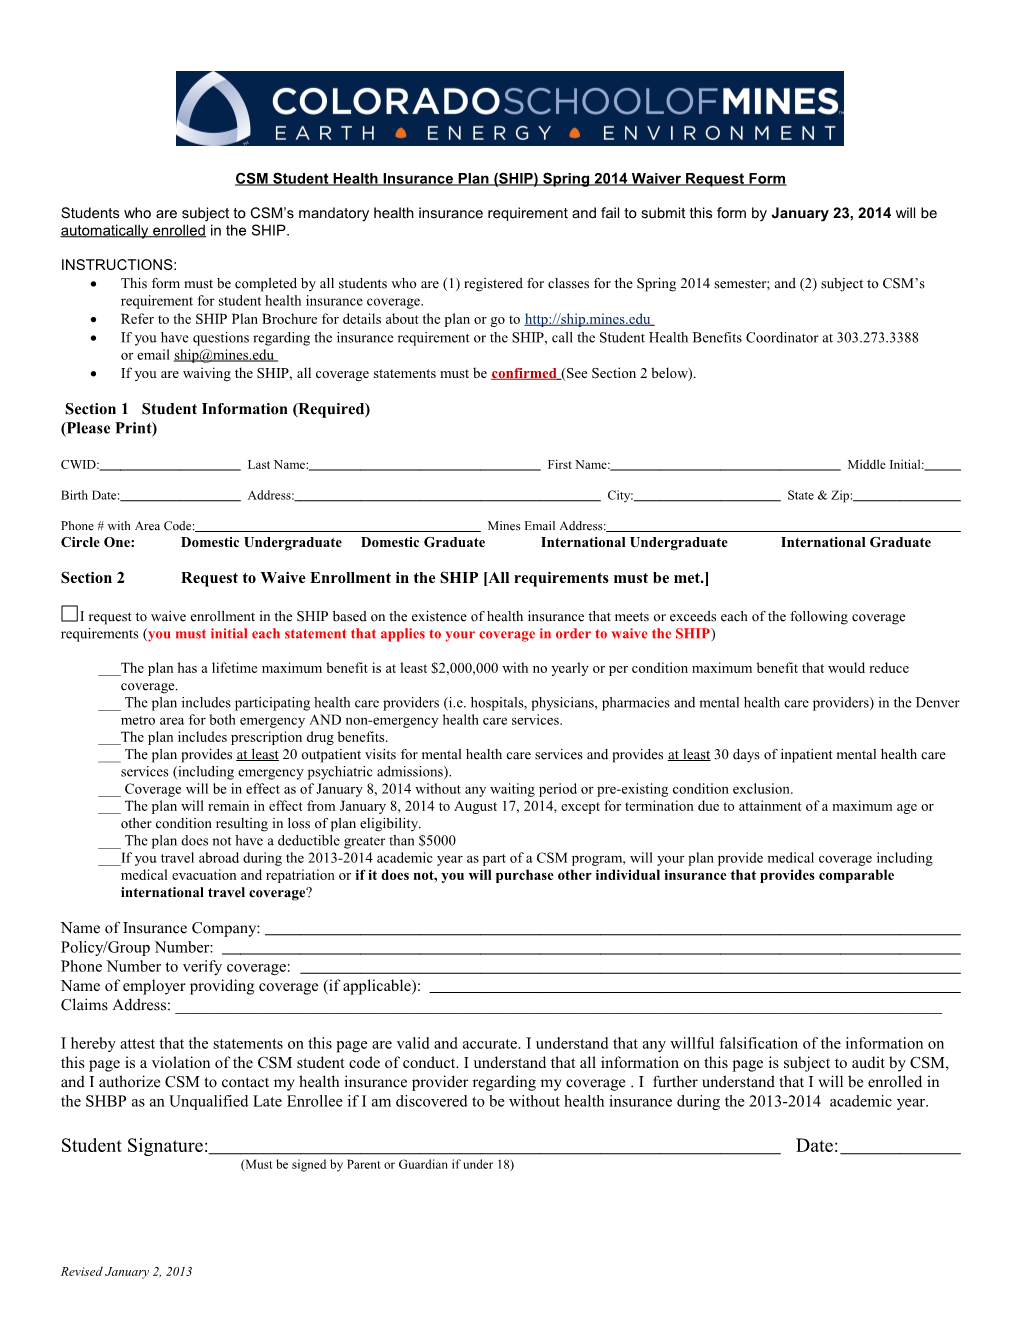 CSM Student Health Insurance Plan (SHIP) Spring 2014 Waiver Request Form